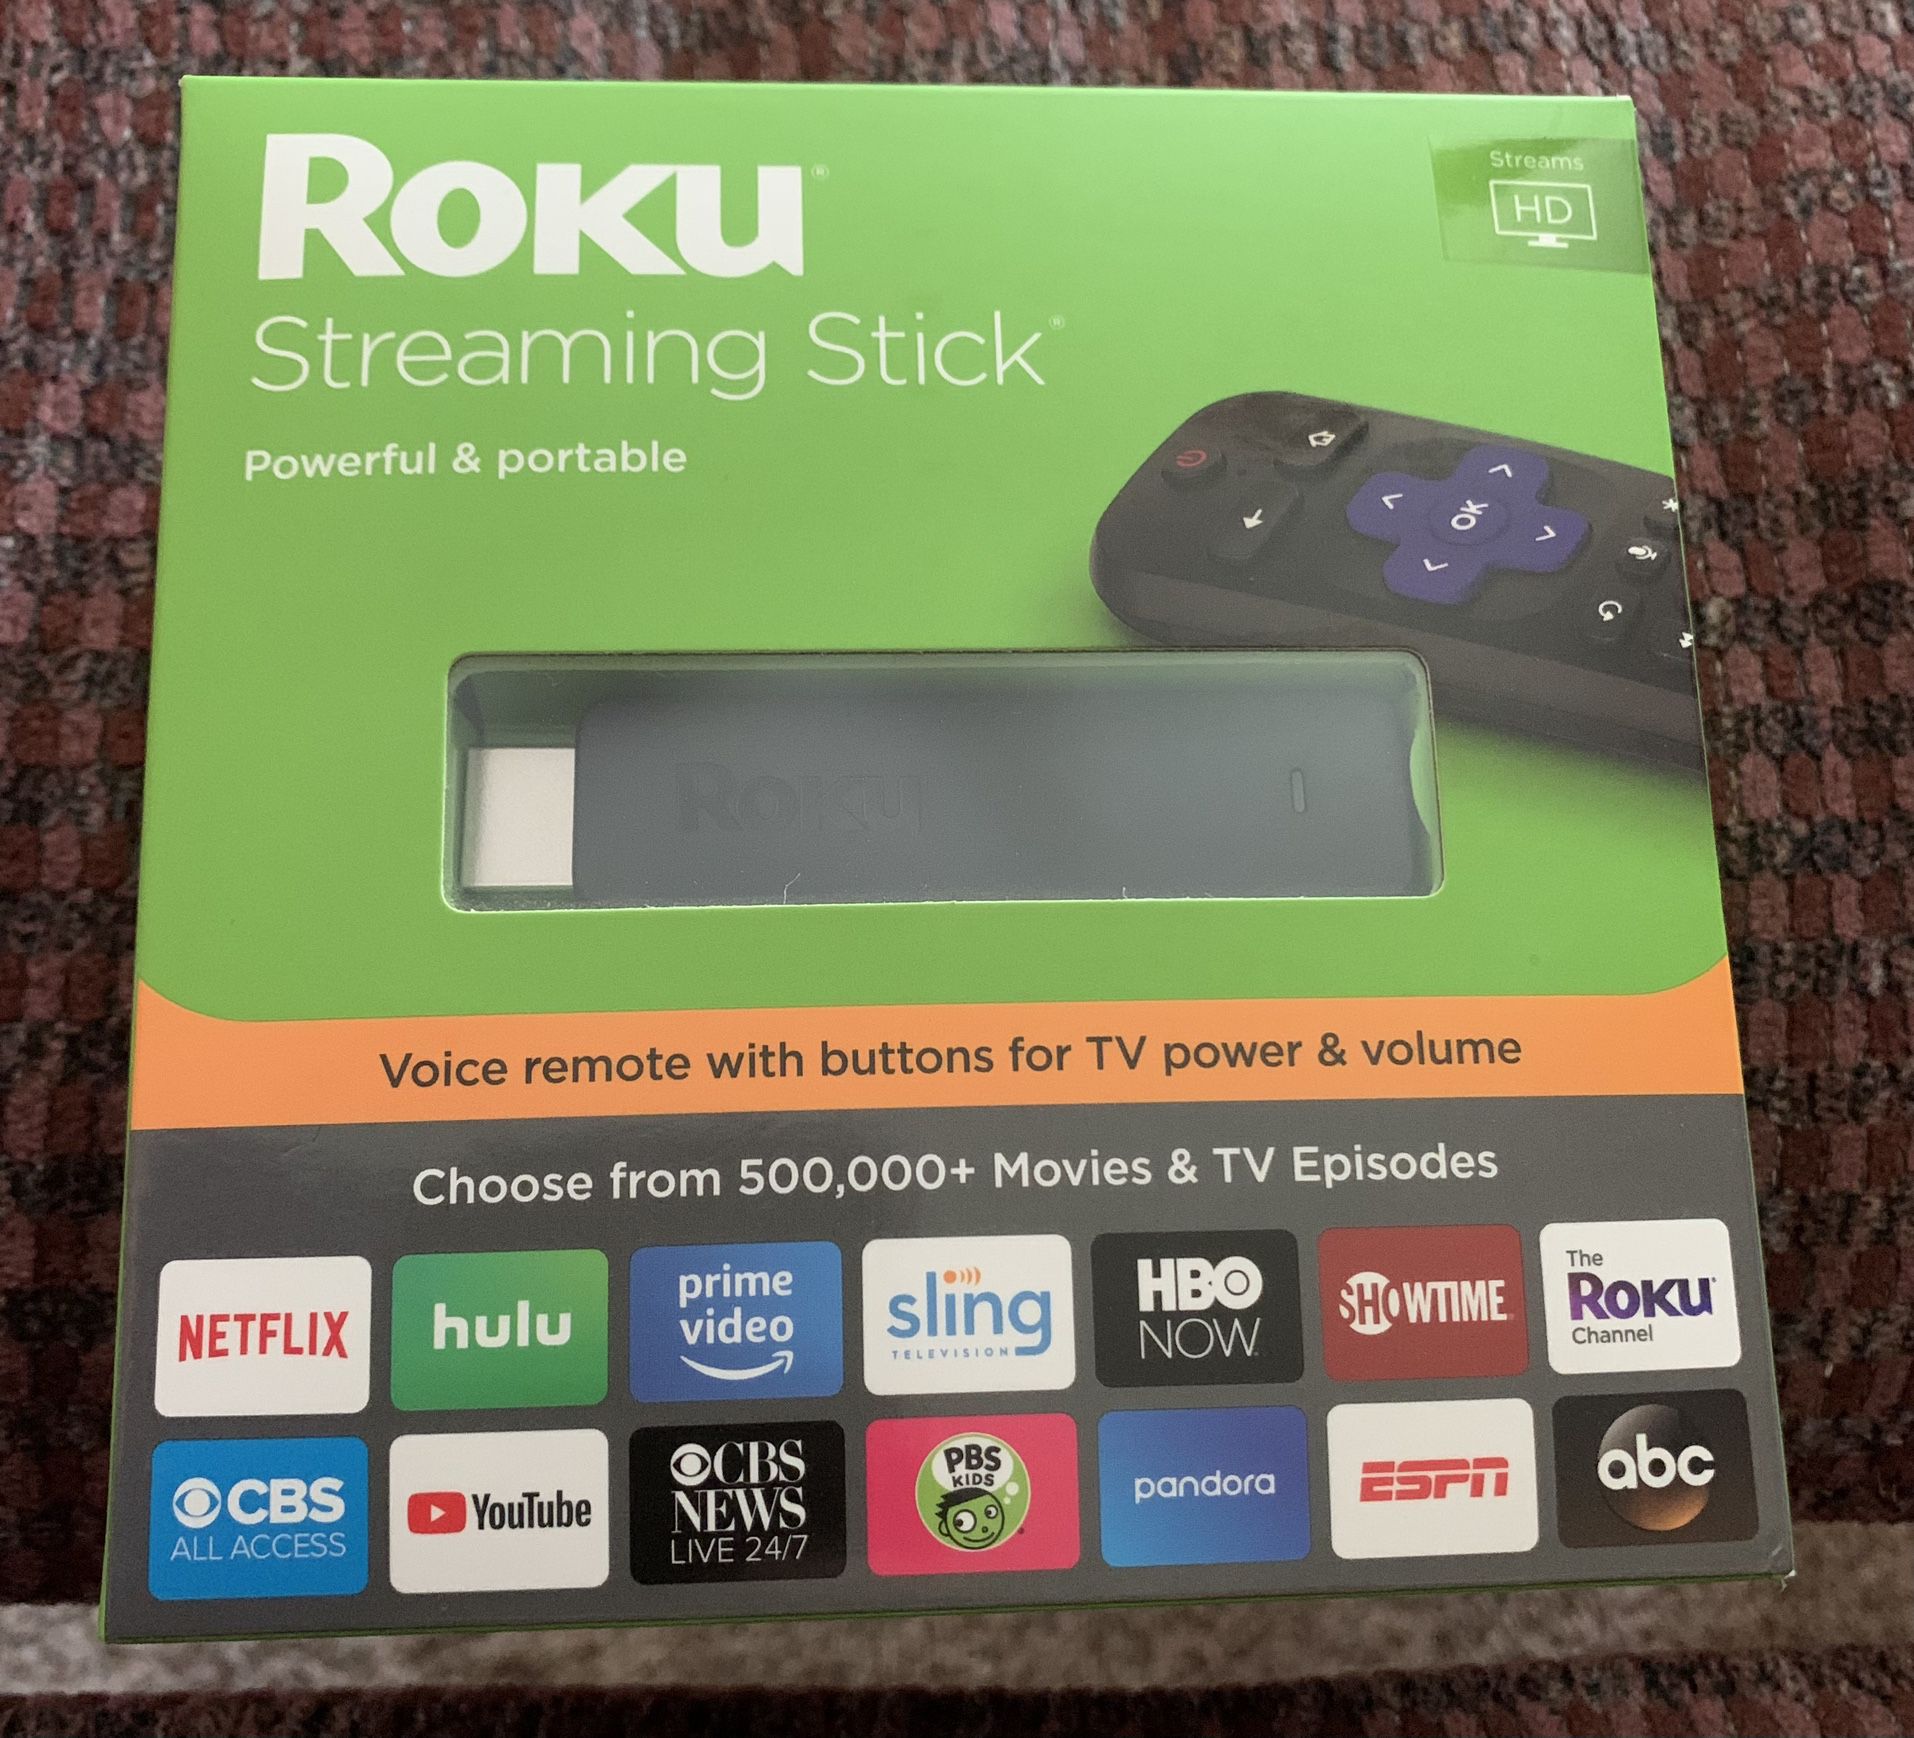 New Roku 3800R Streaming Stick With Voice Remote - Black